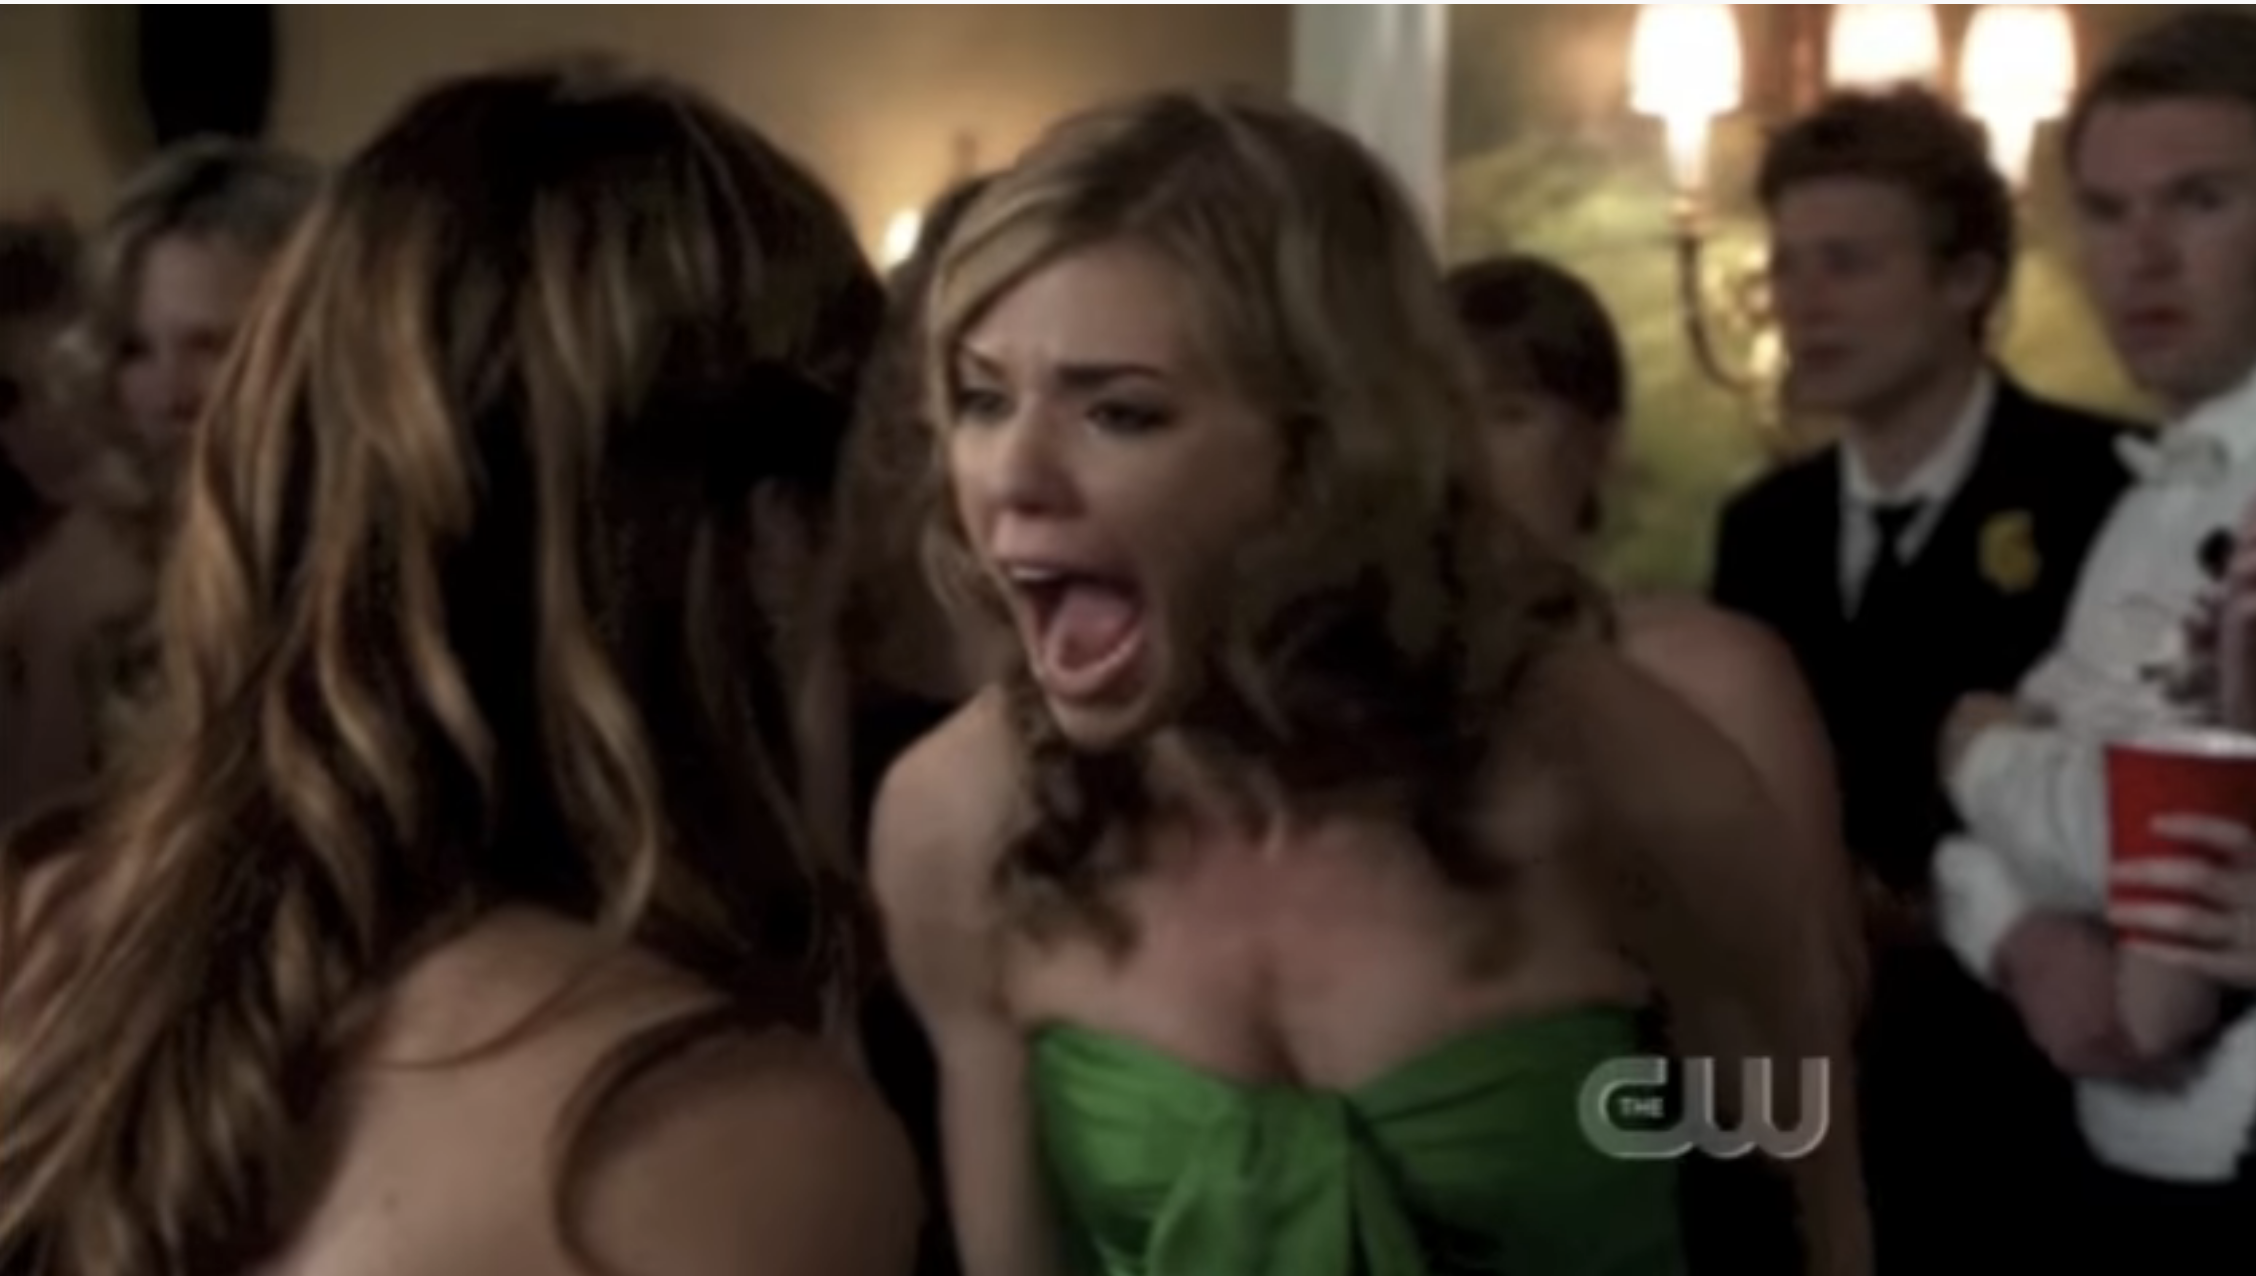 Two girls yelling at each other in &quot;90210&quot;